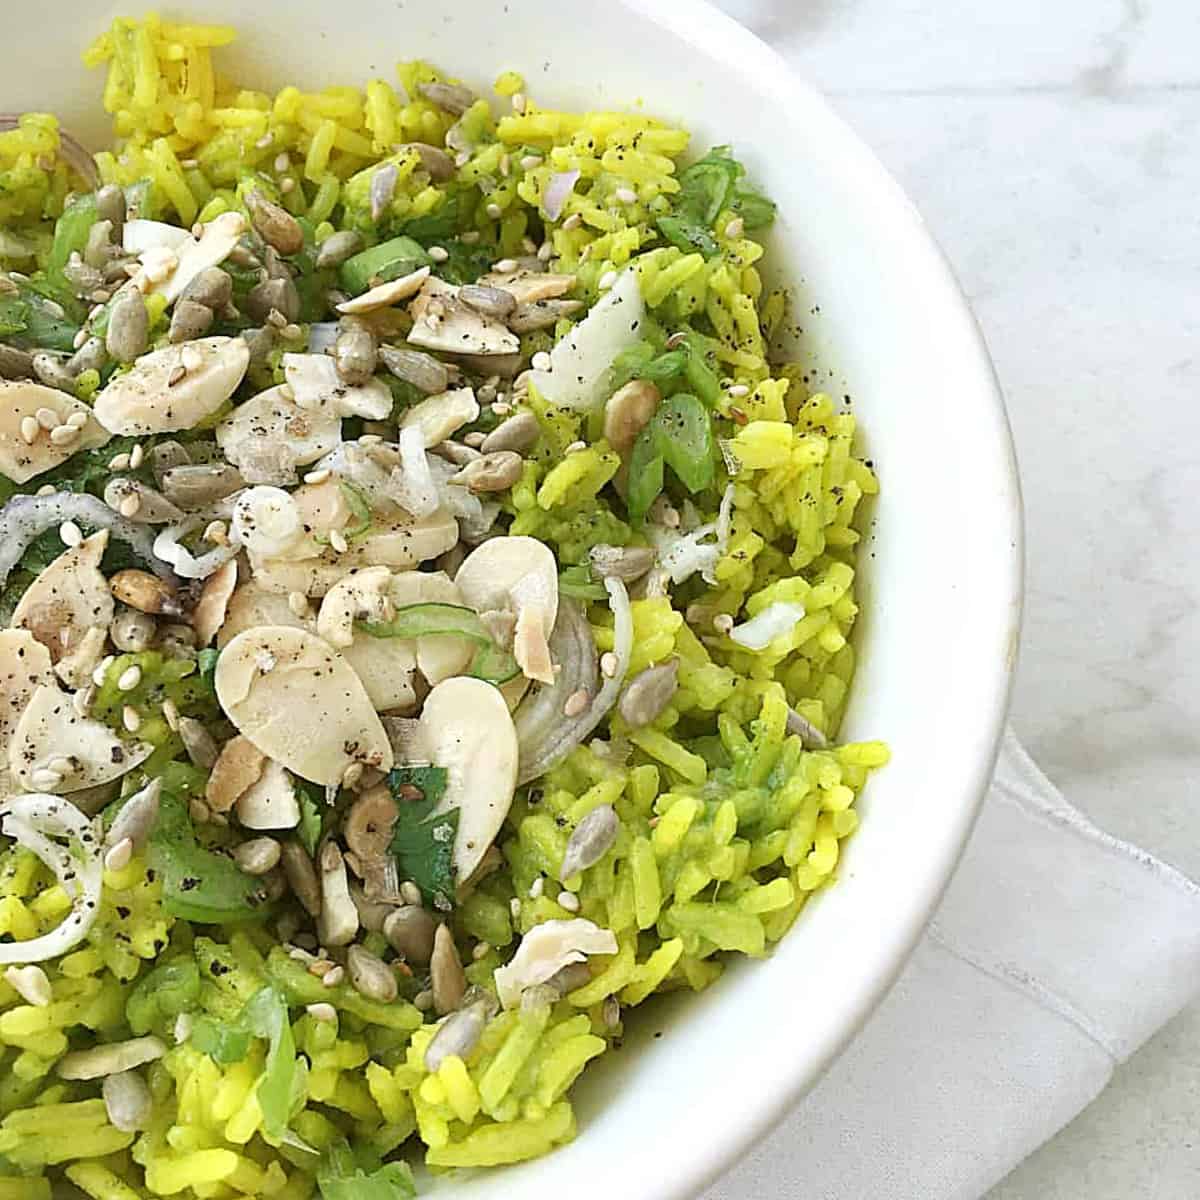 Half image of white bowl with green rice with almonds and seeds on white surface.